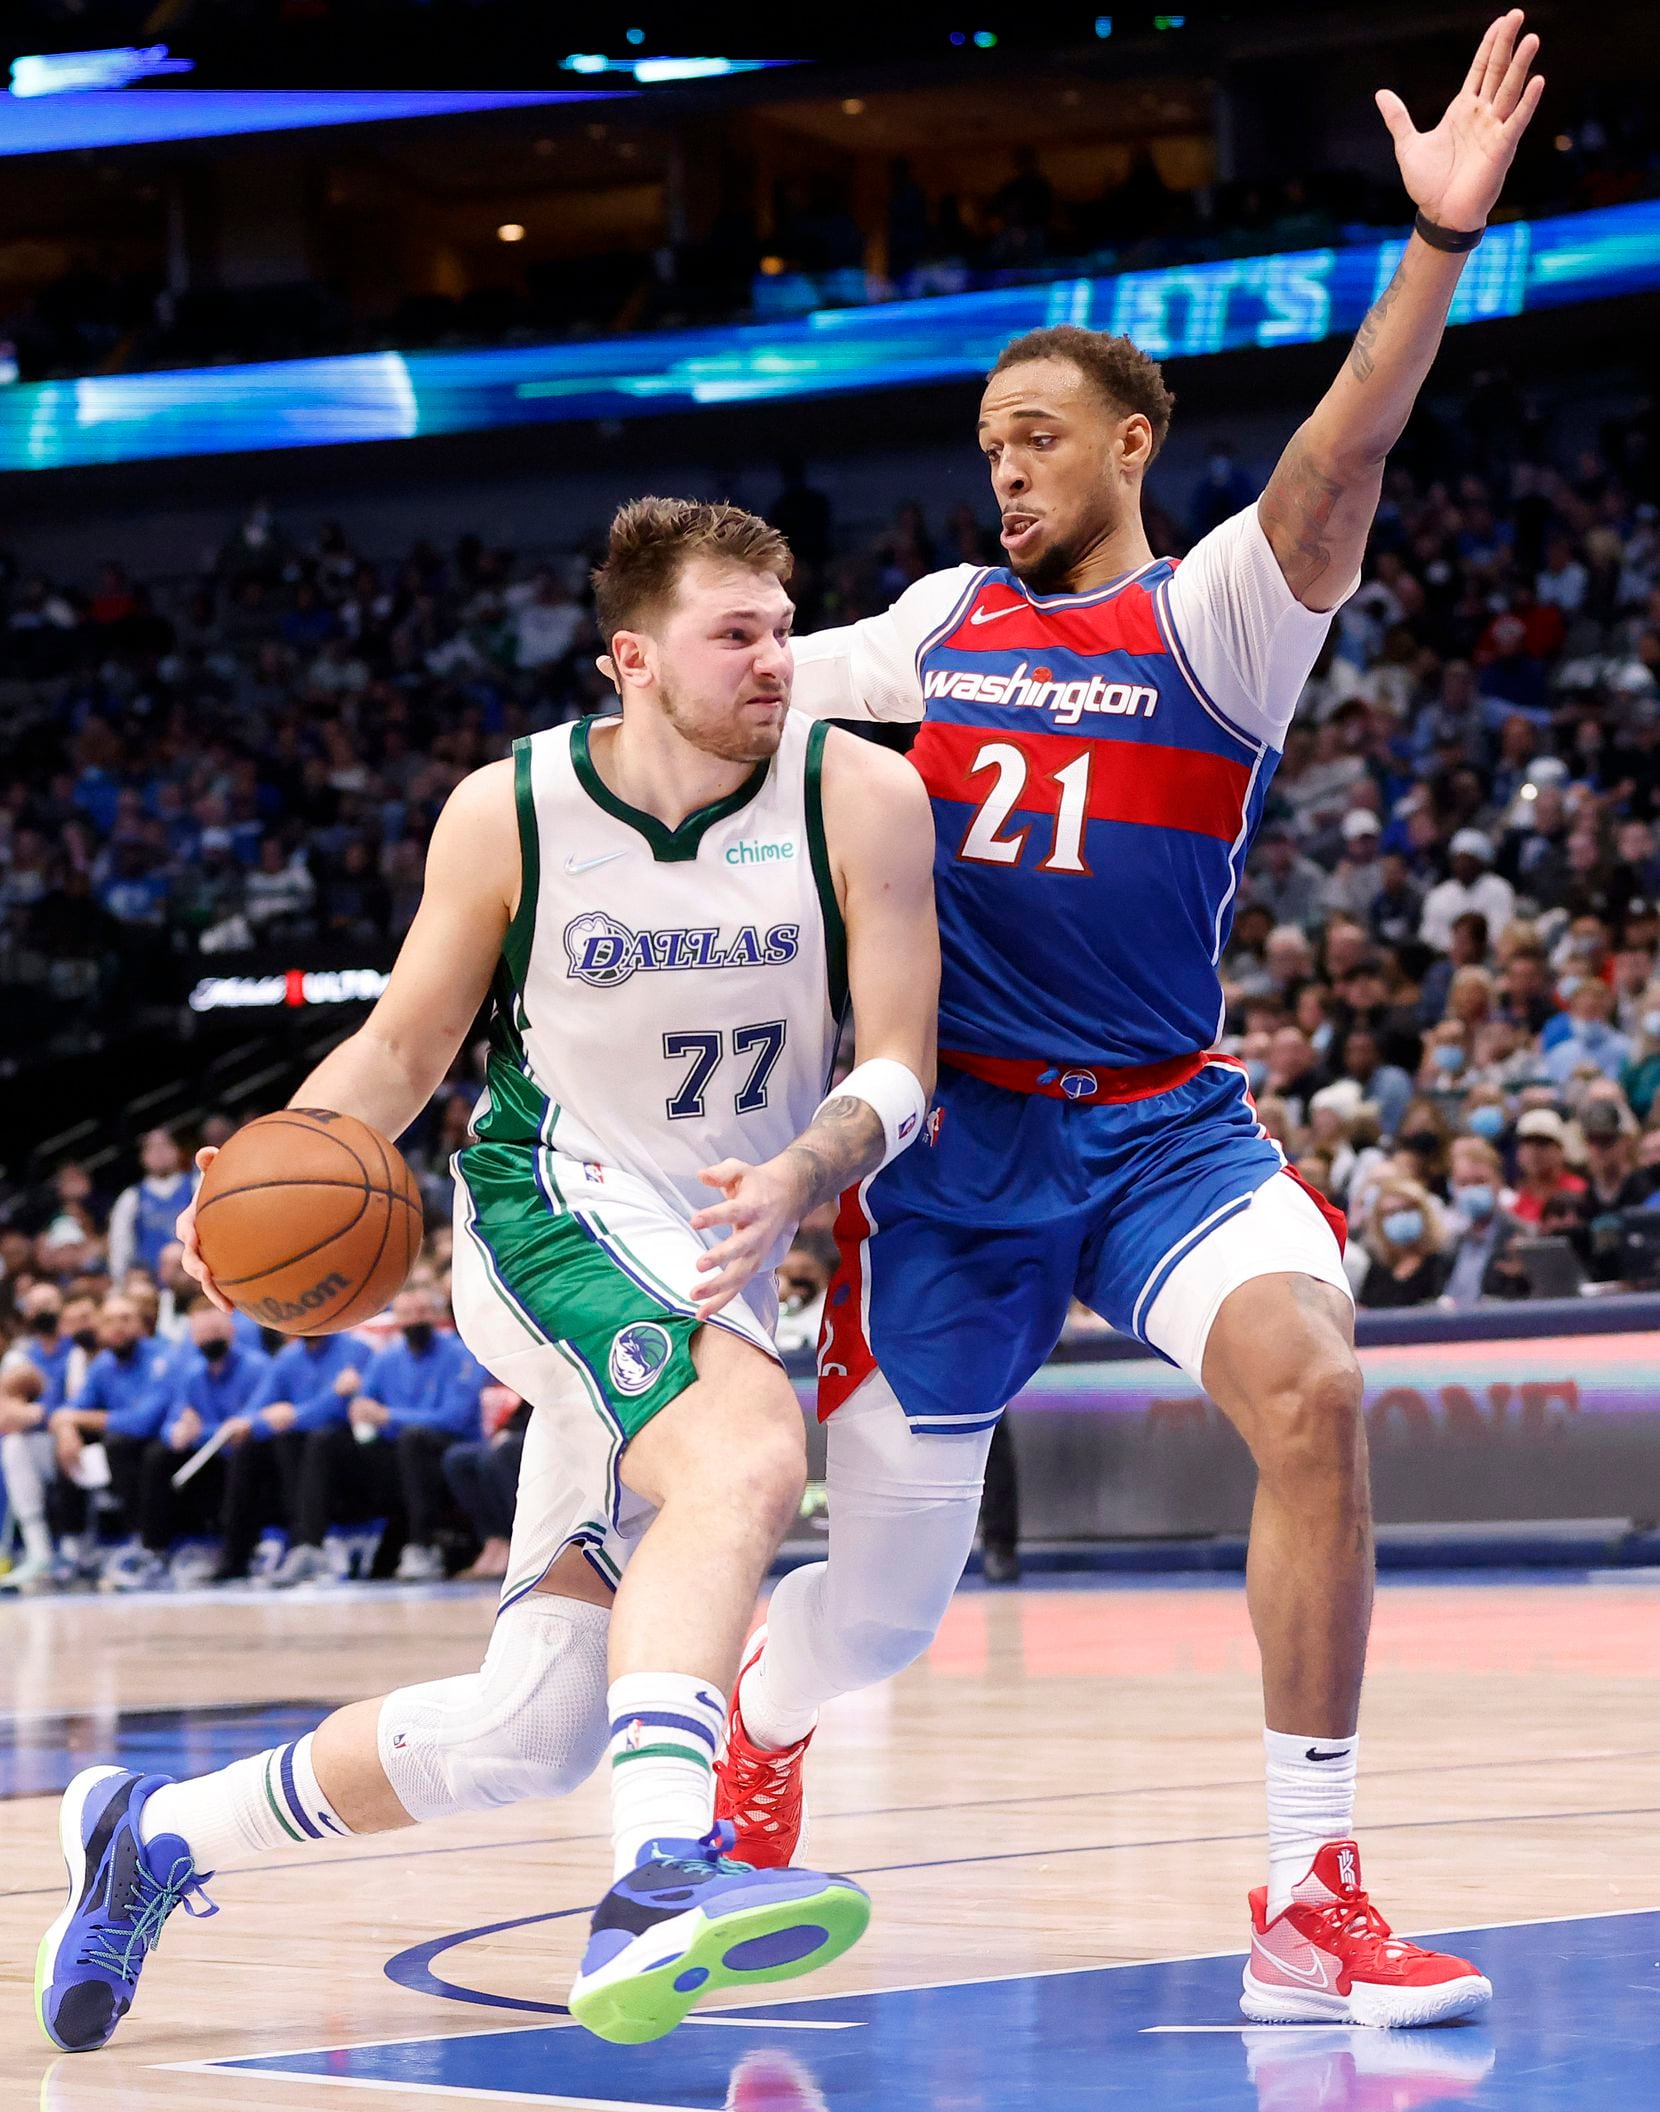 Dallas Mavericks guard Luka Doncic (77) drives to the basket past Washington Wizards center Daniel Gafford (21 during the fourth quarter at the American Airlines Center in Dallas, November 27, 2021. (Tom Fox/The Dallas Morning News)